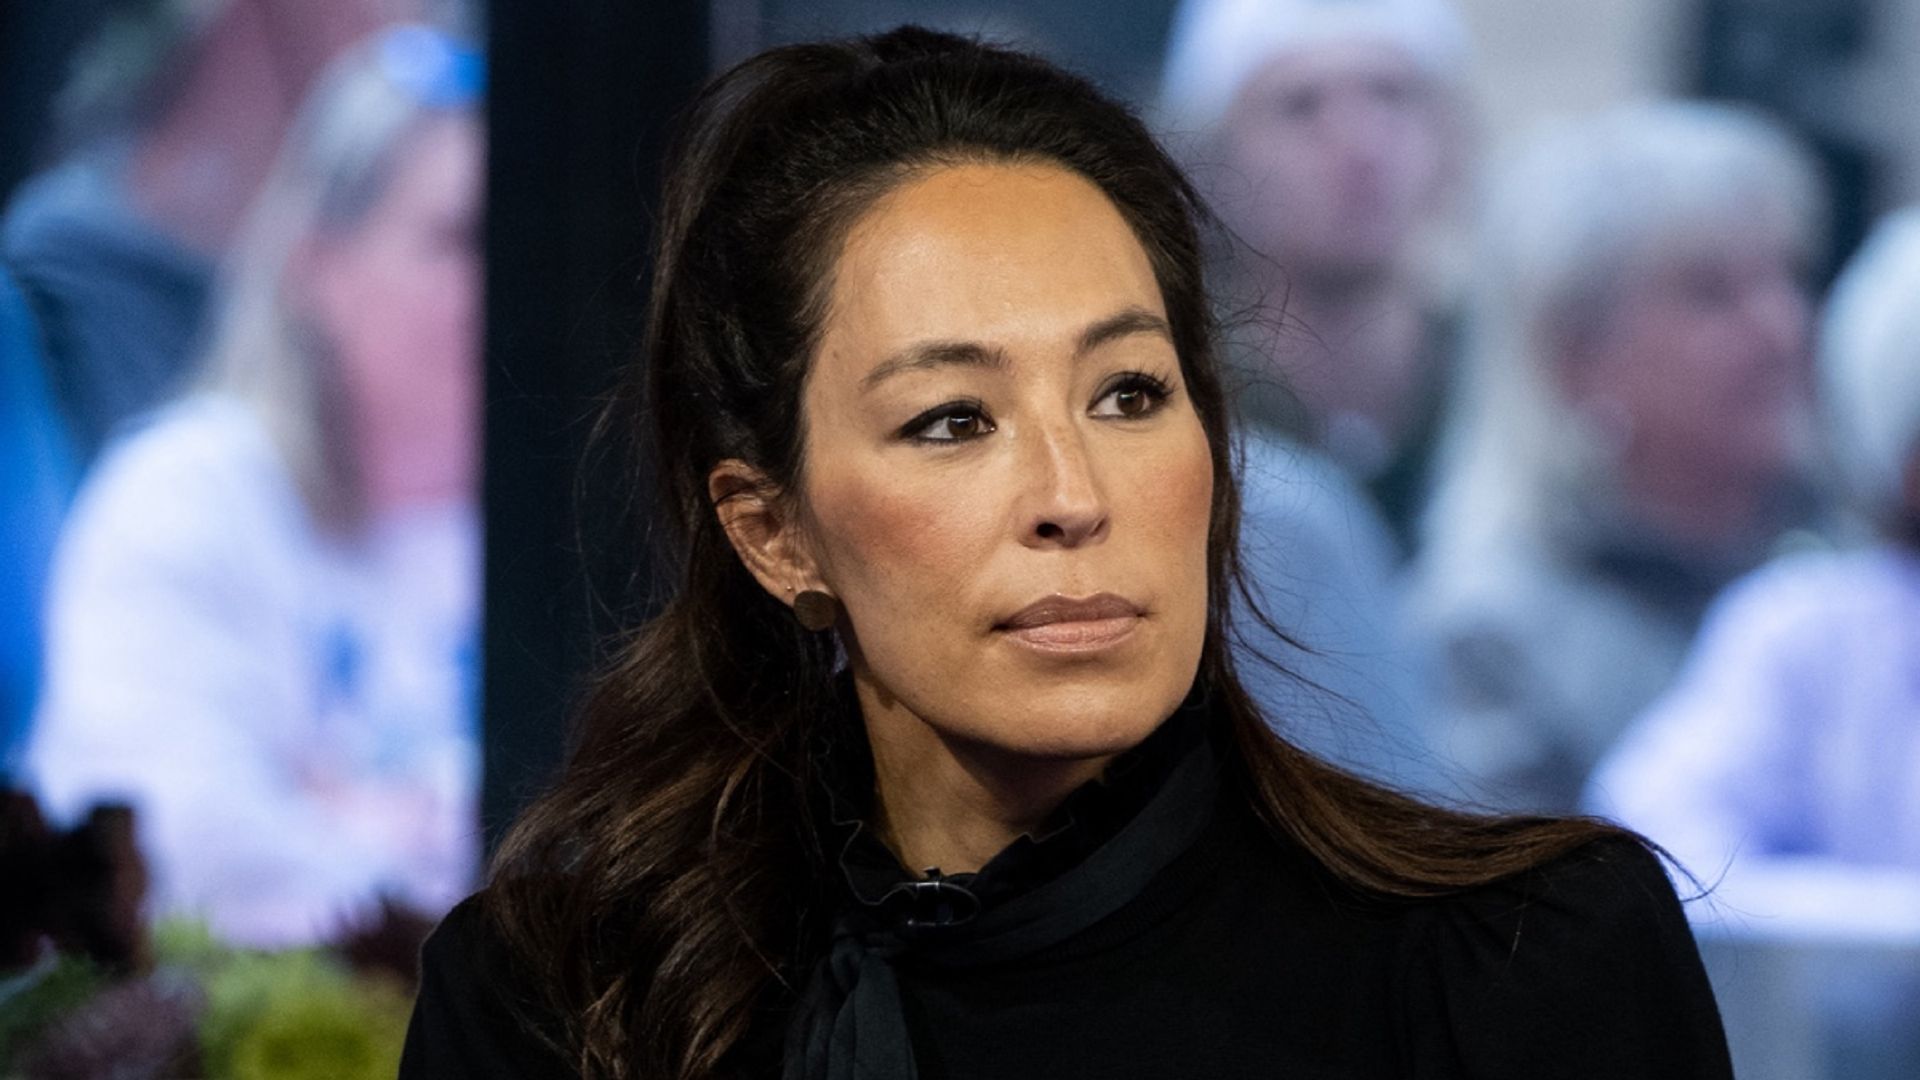 Joanna Gaines shares painful health update with hospital photo